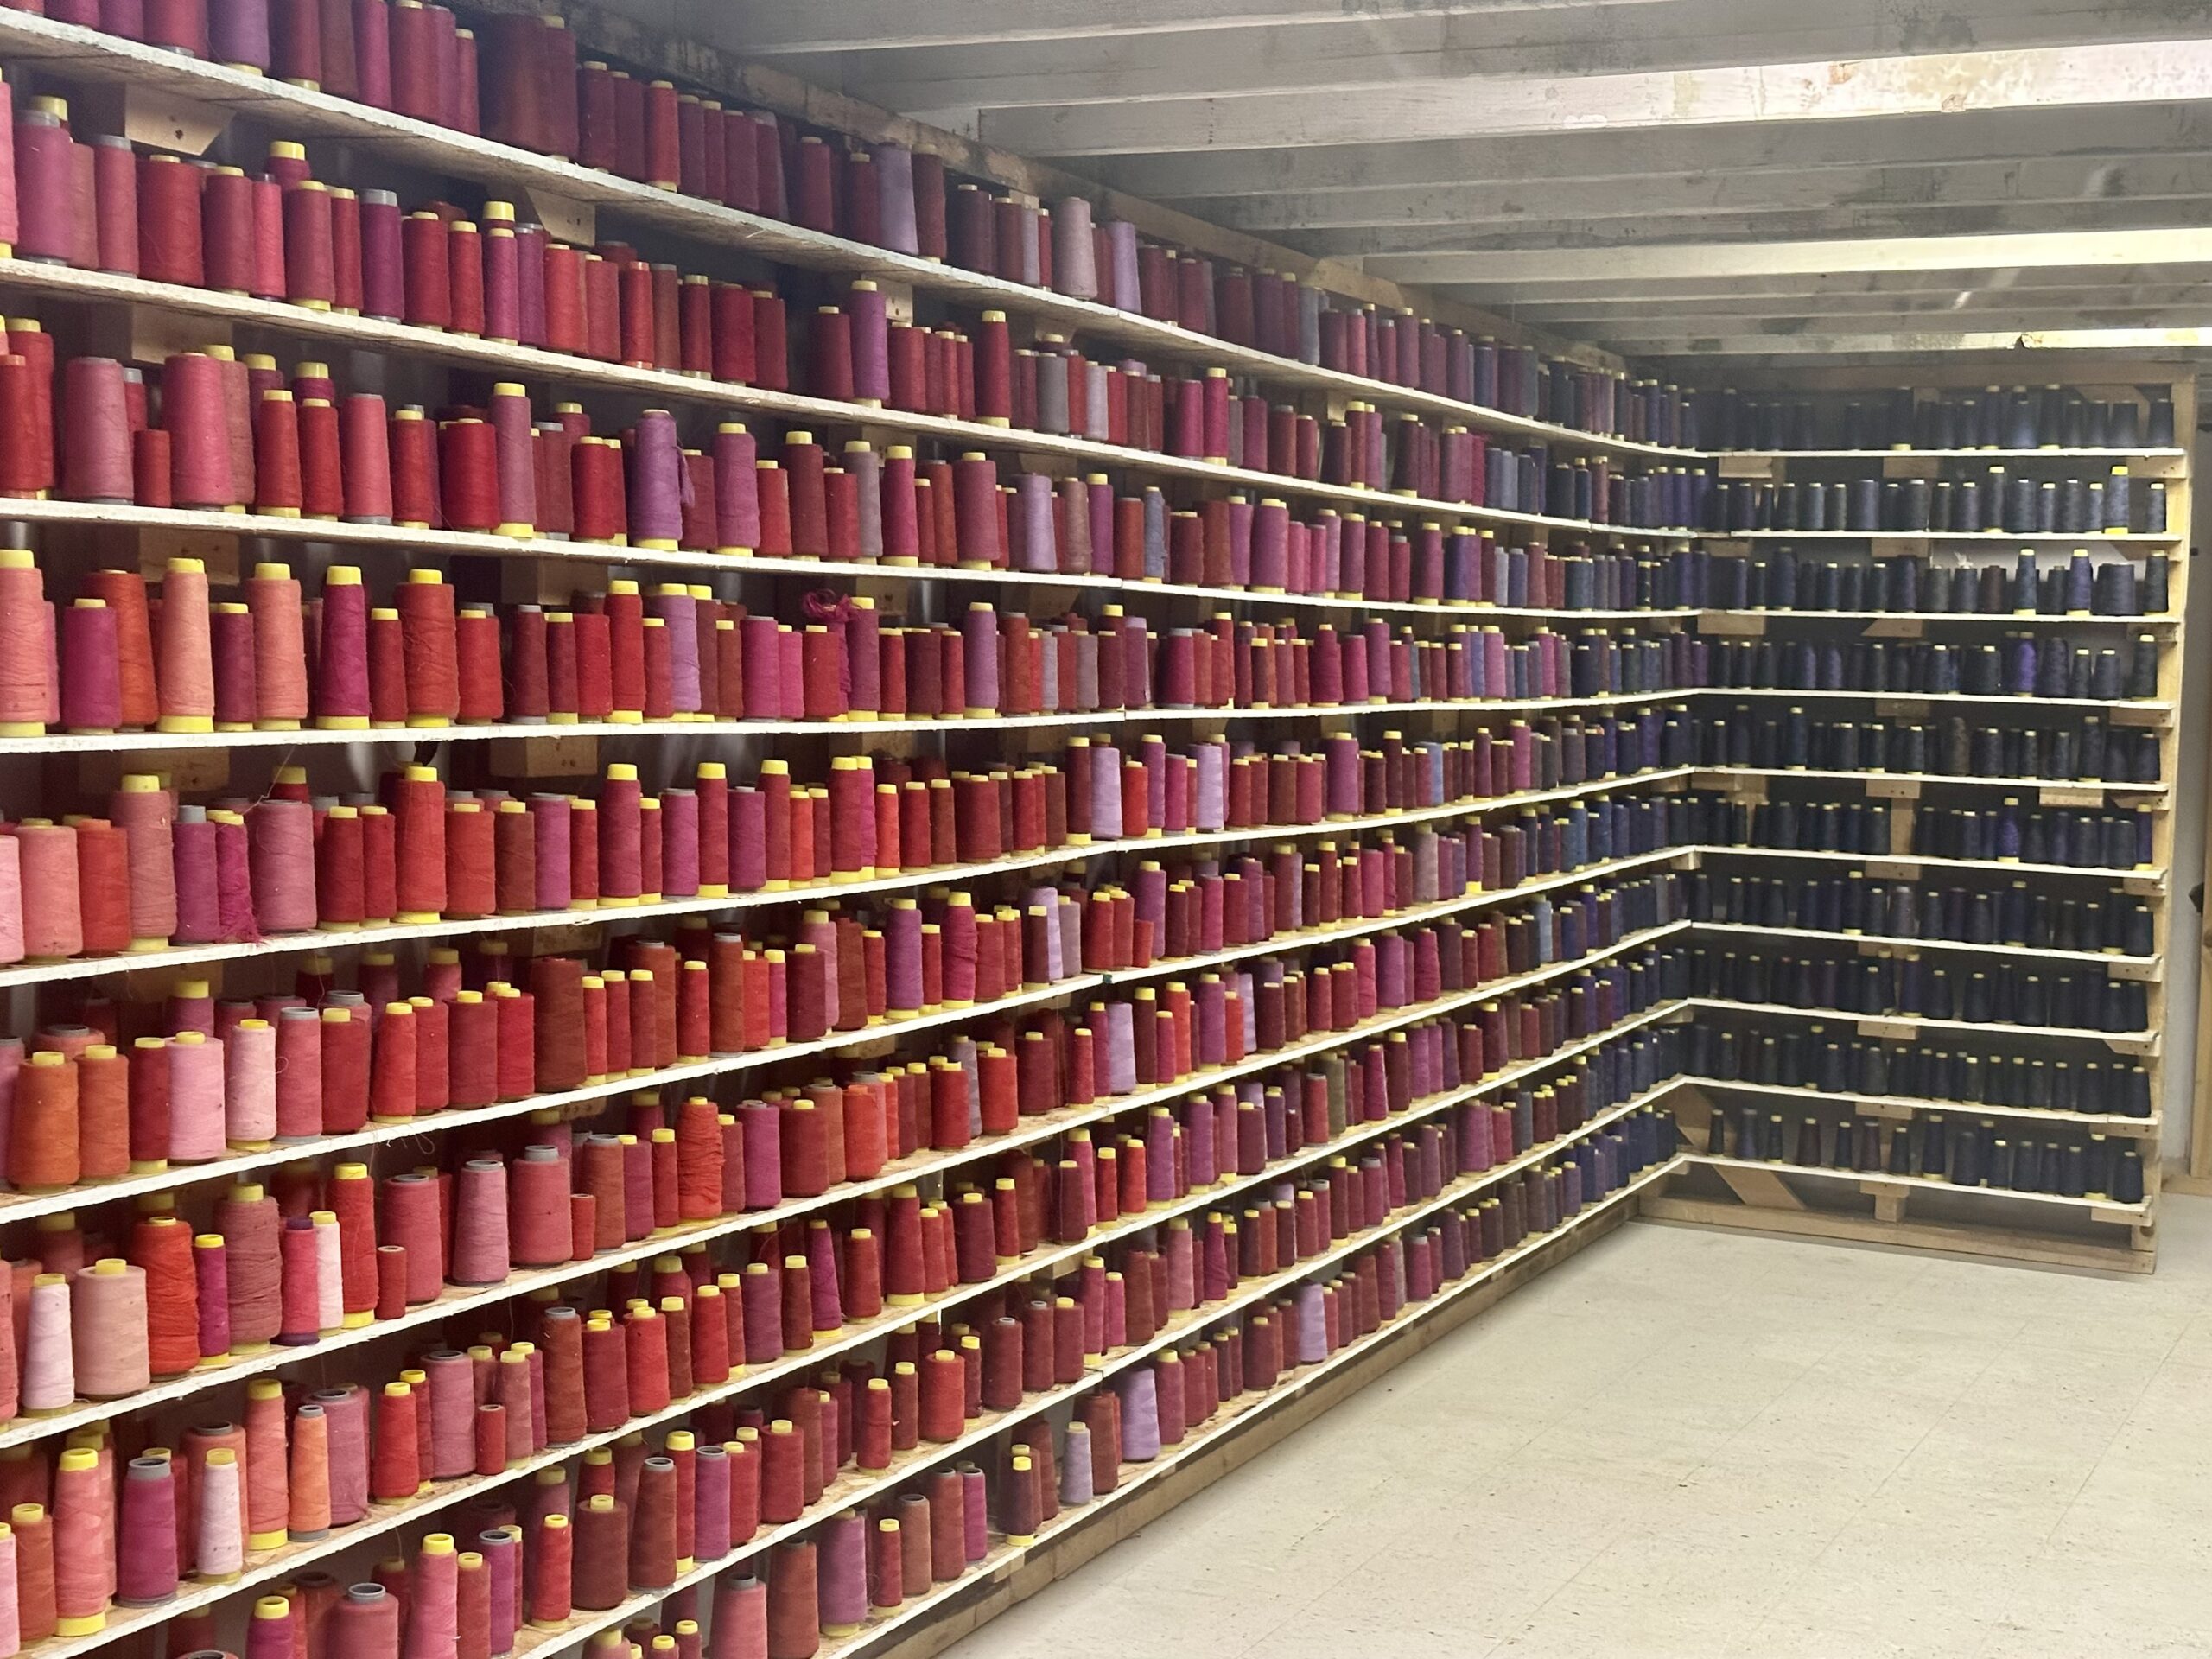 Many spools of red and purple thread on floor-to-ceiling shelving.